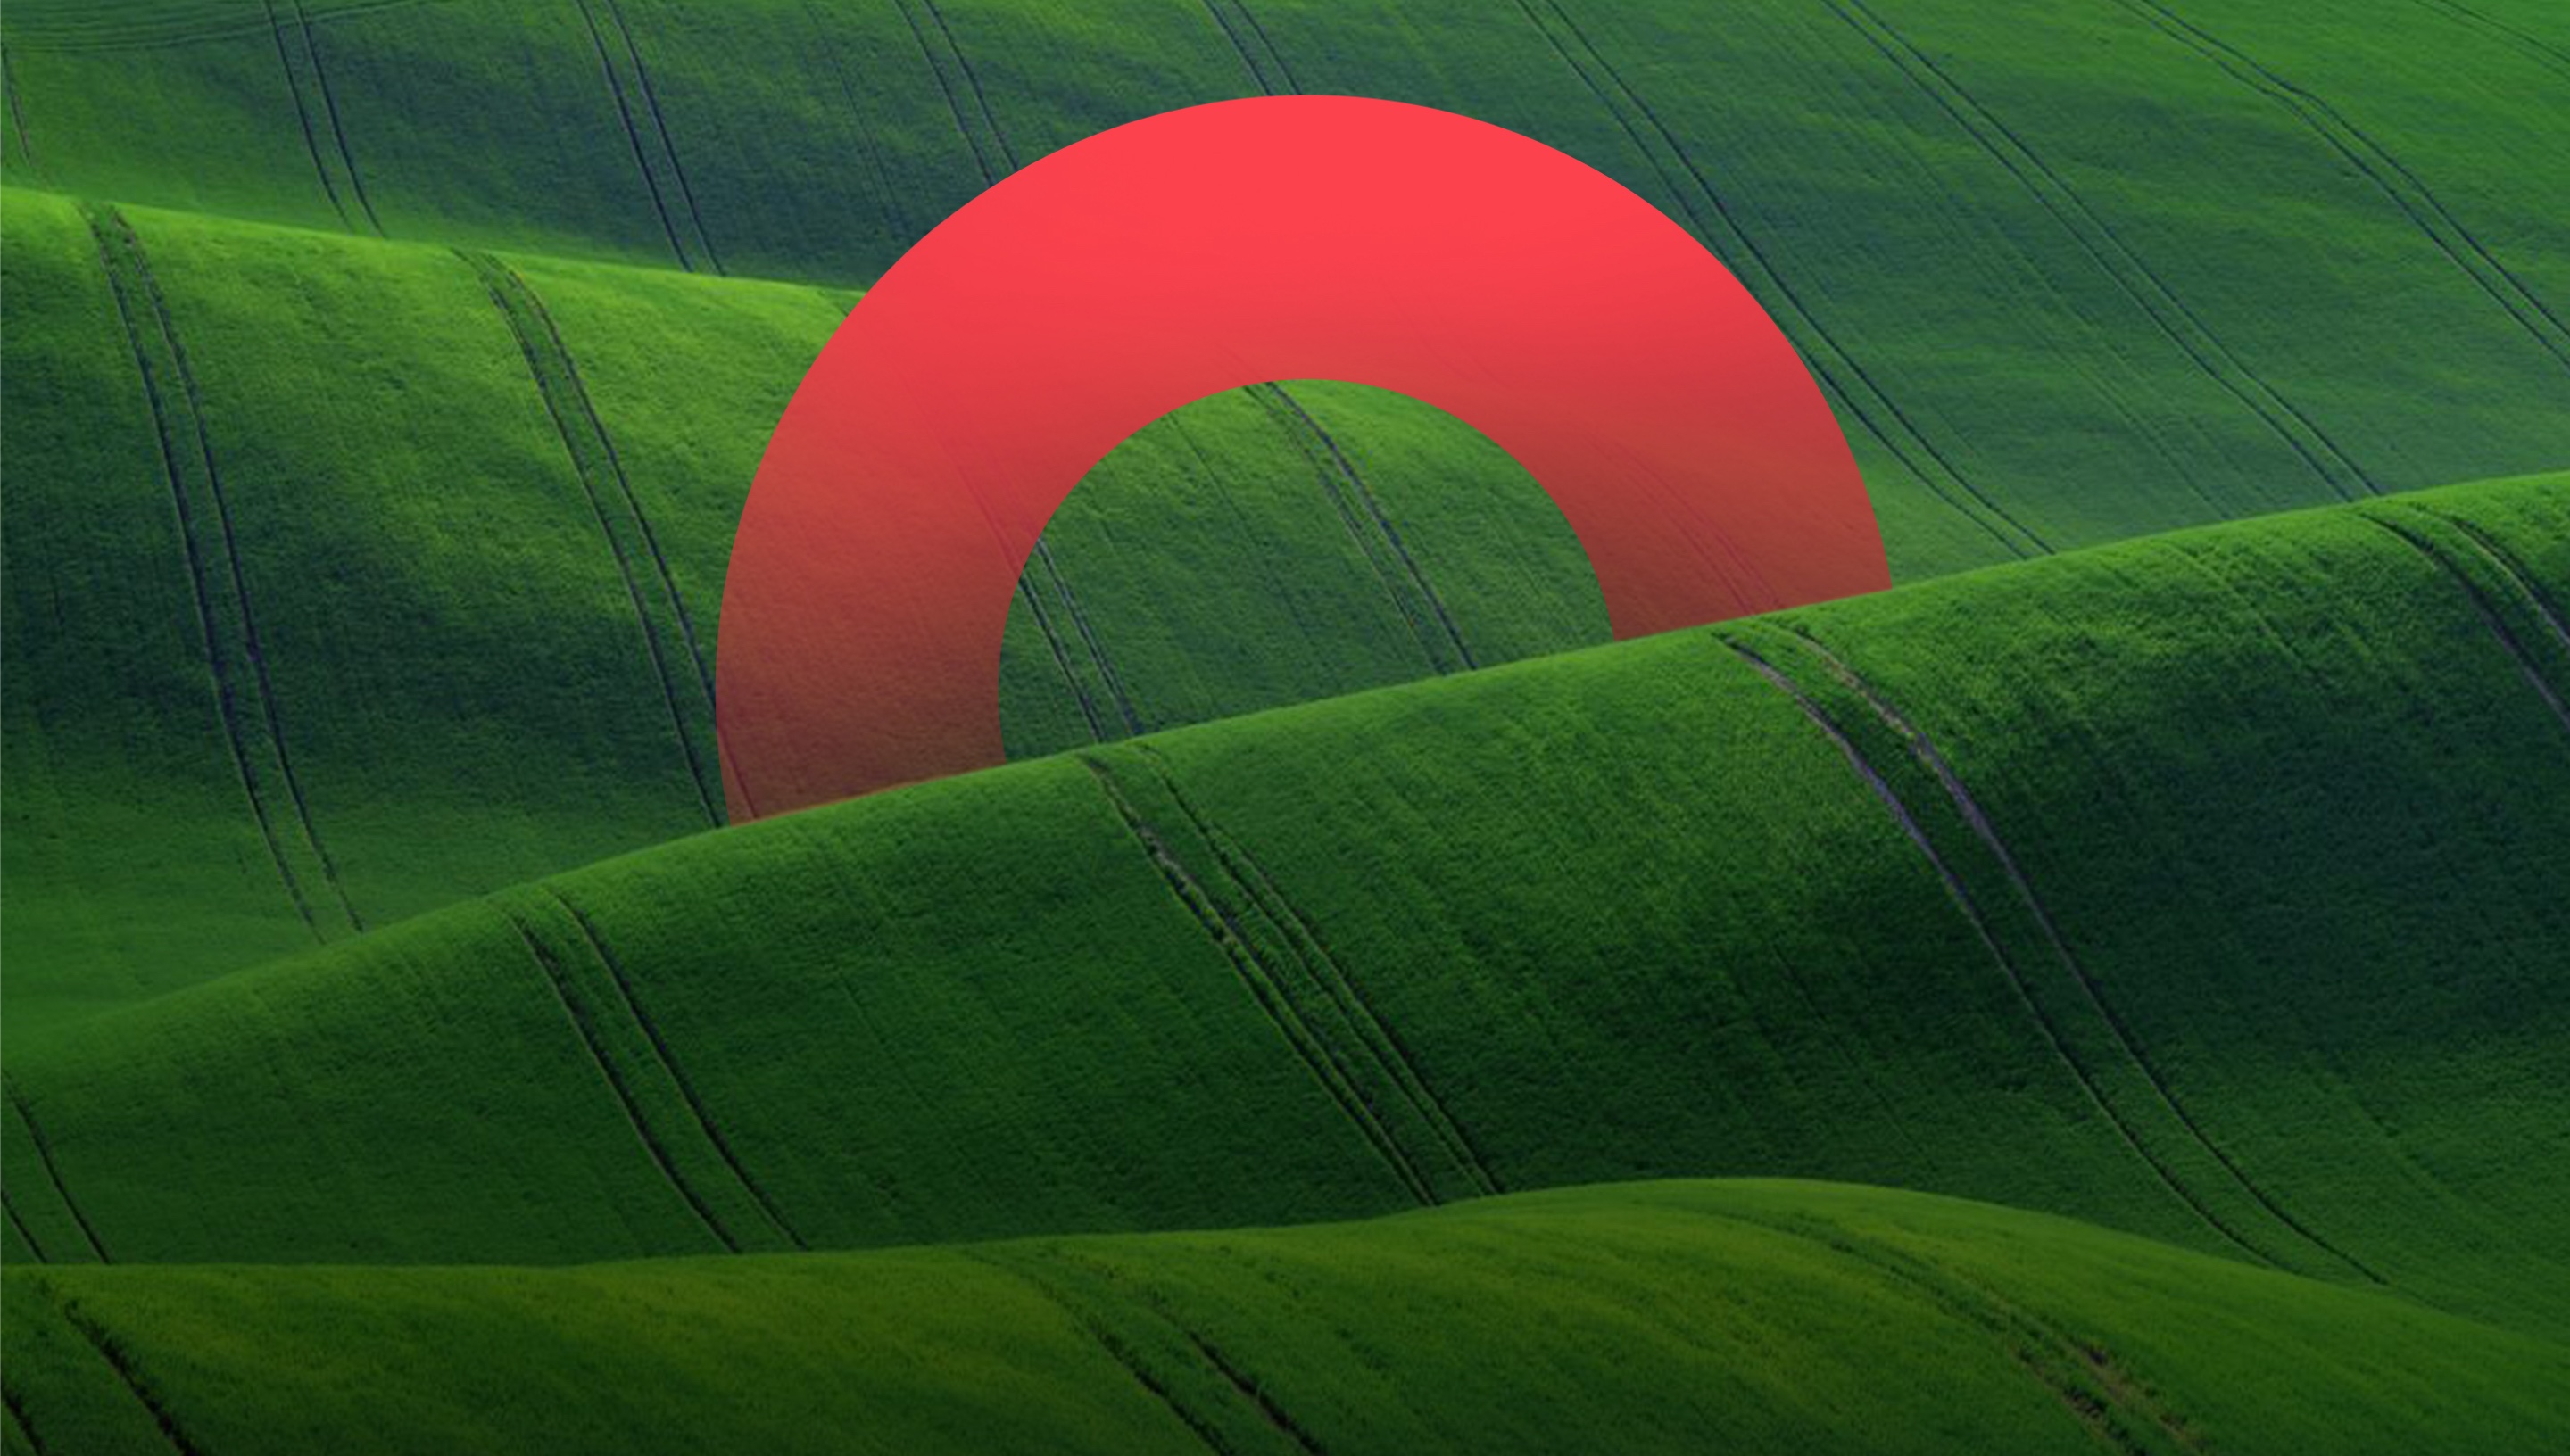 Rolling green hills with a red circle